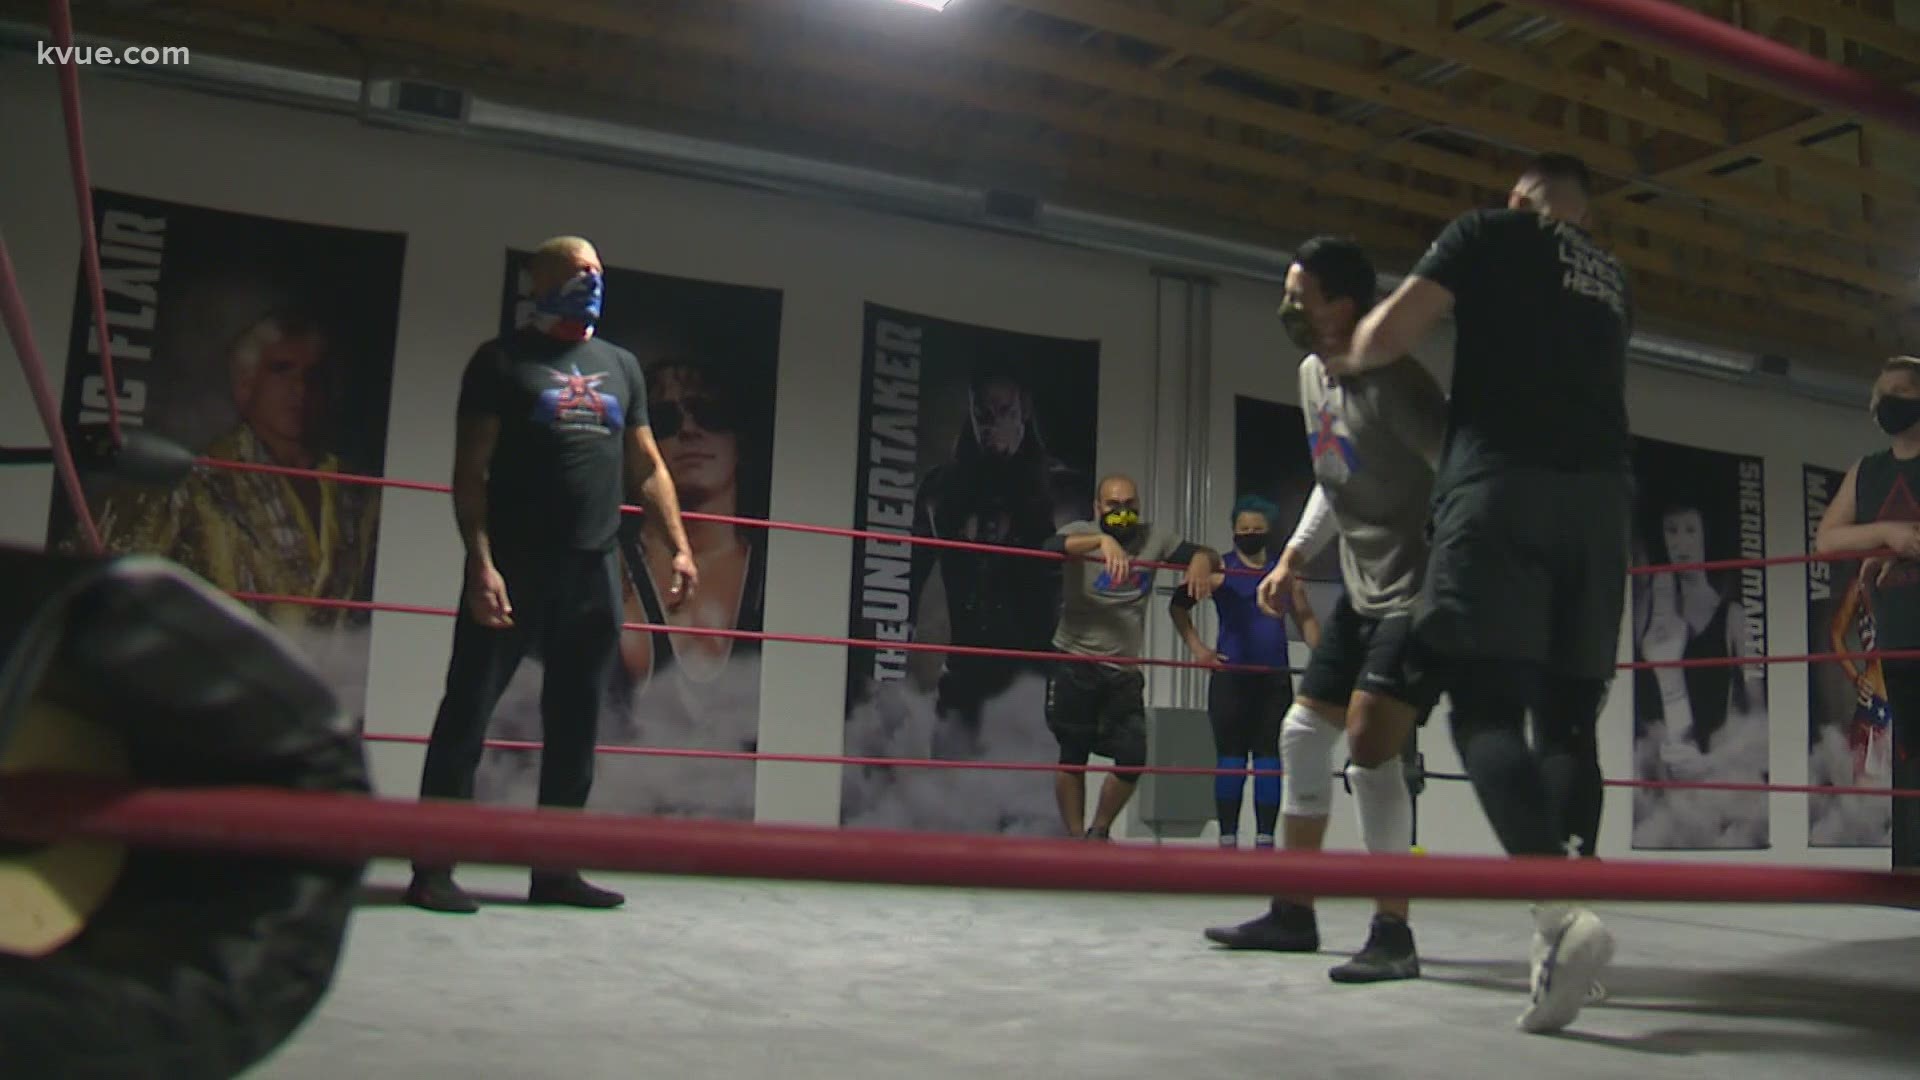 Dustin Rhodes has opened Rhodes Wrestling Academy, a dream he's had for 20 years.